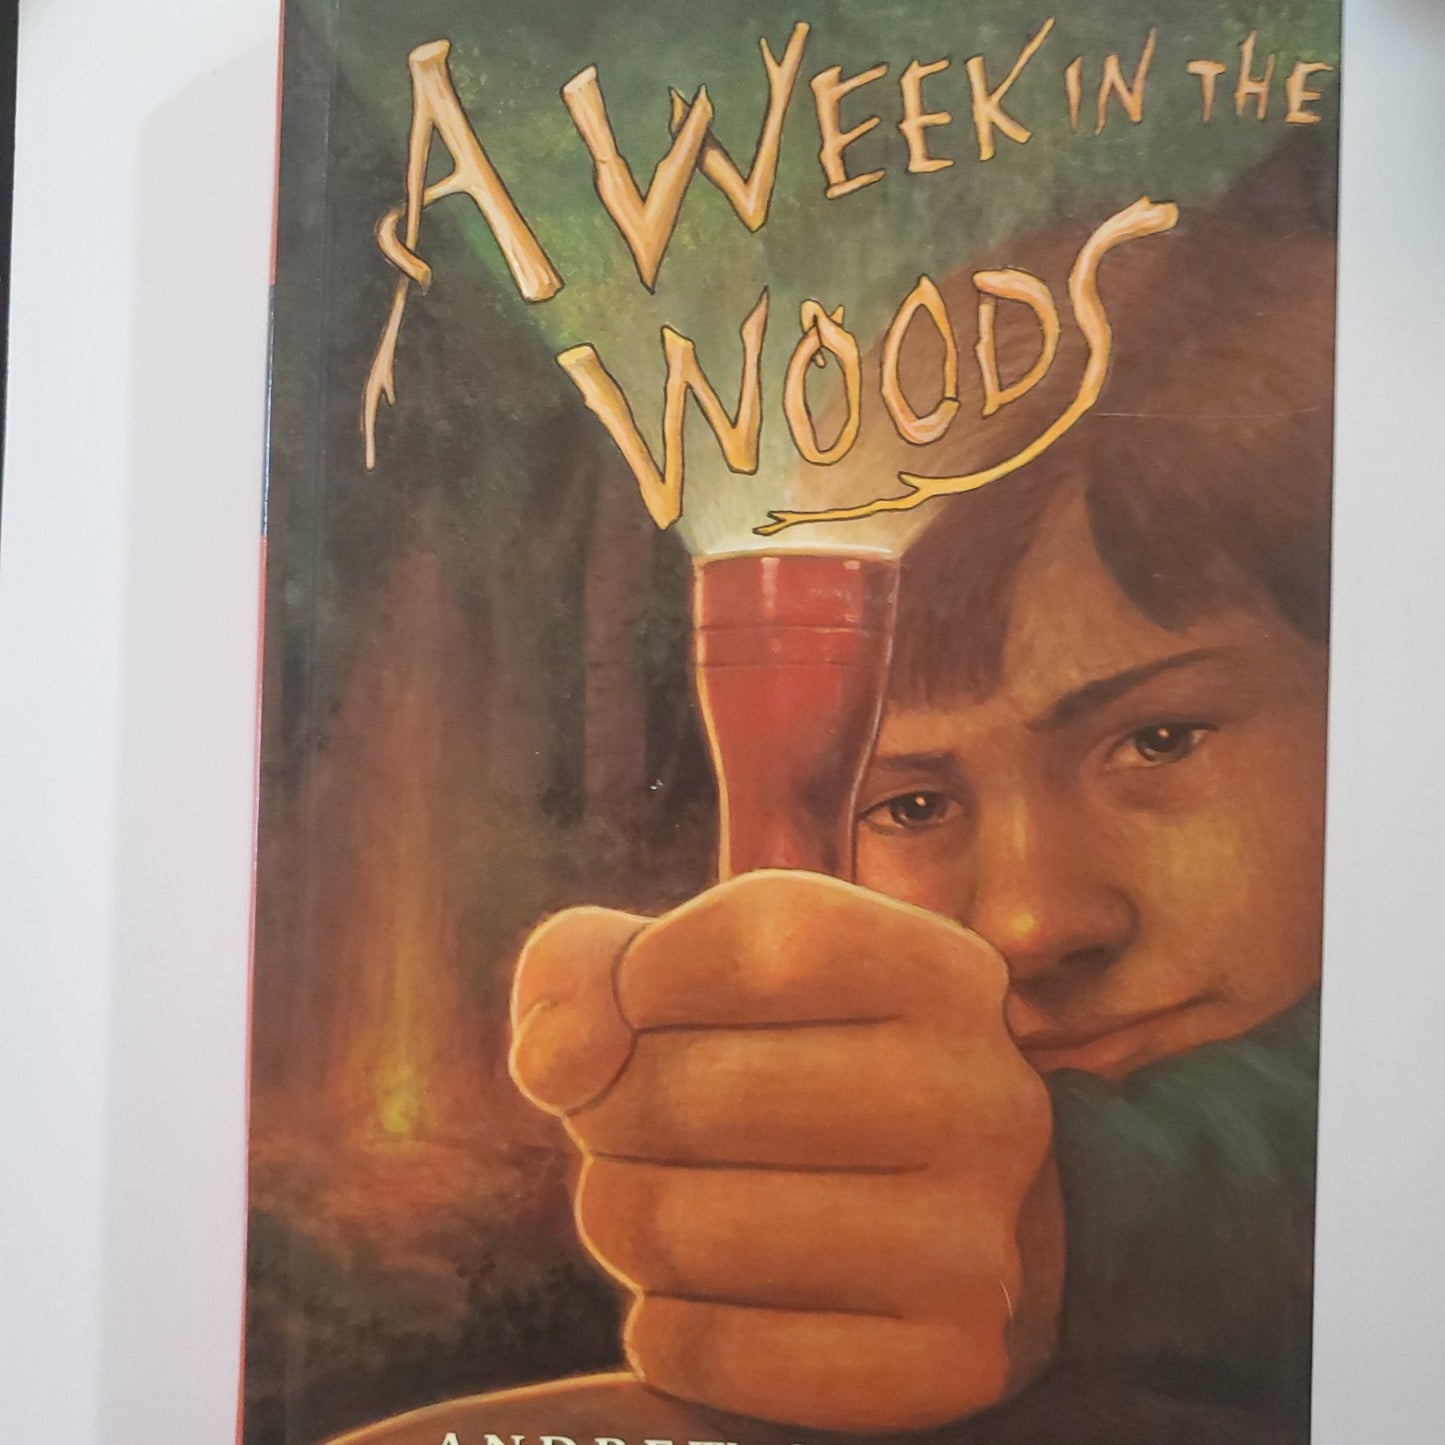 A Week in the Woods - [ash-ling] Booksellers